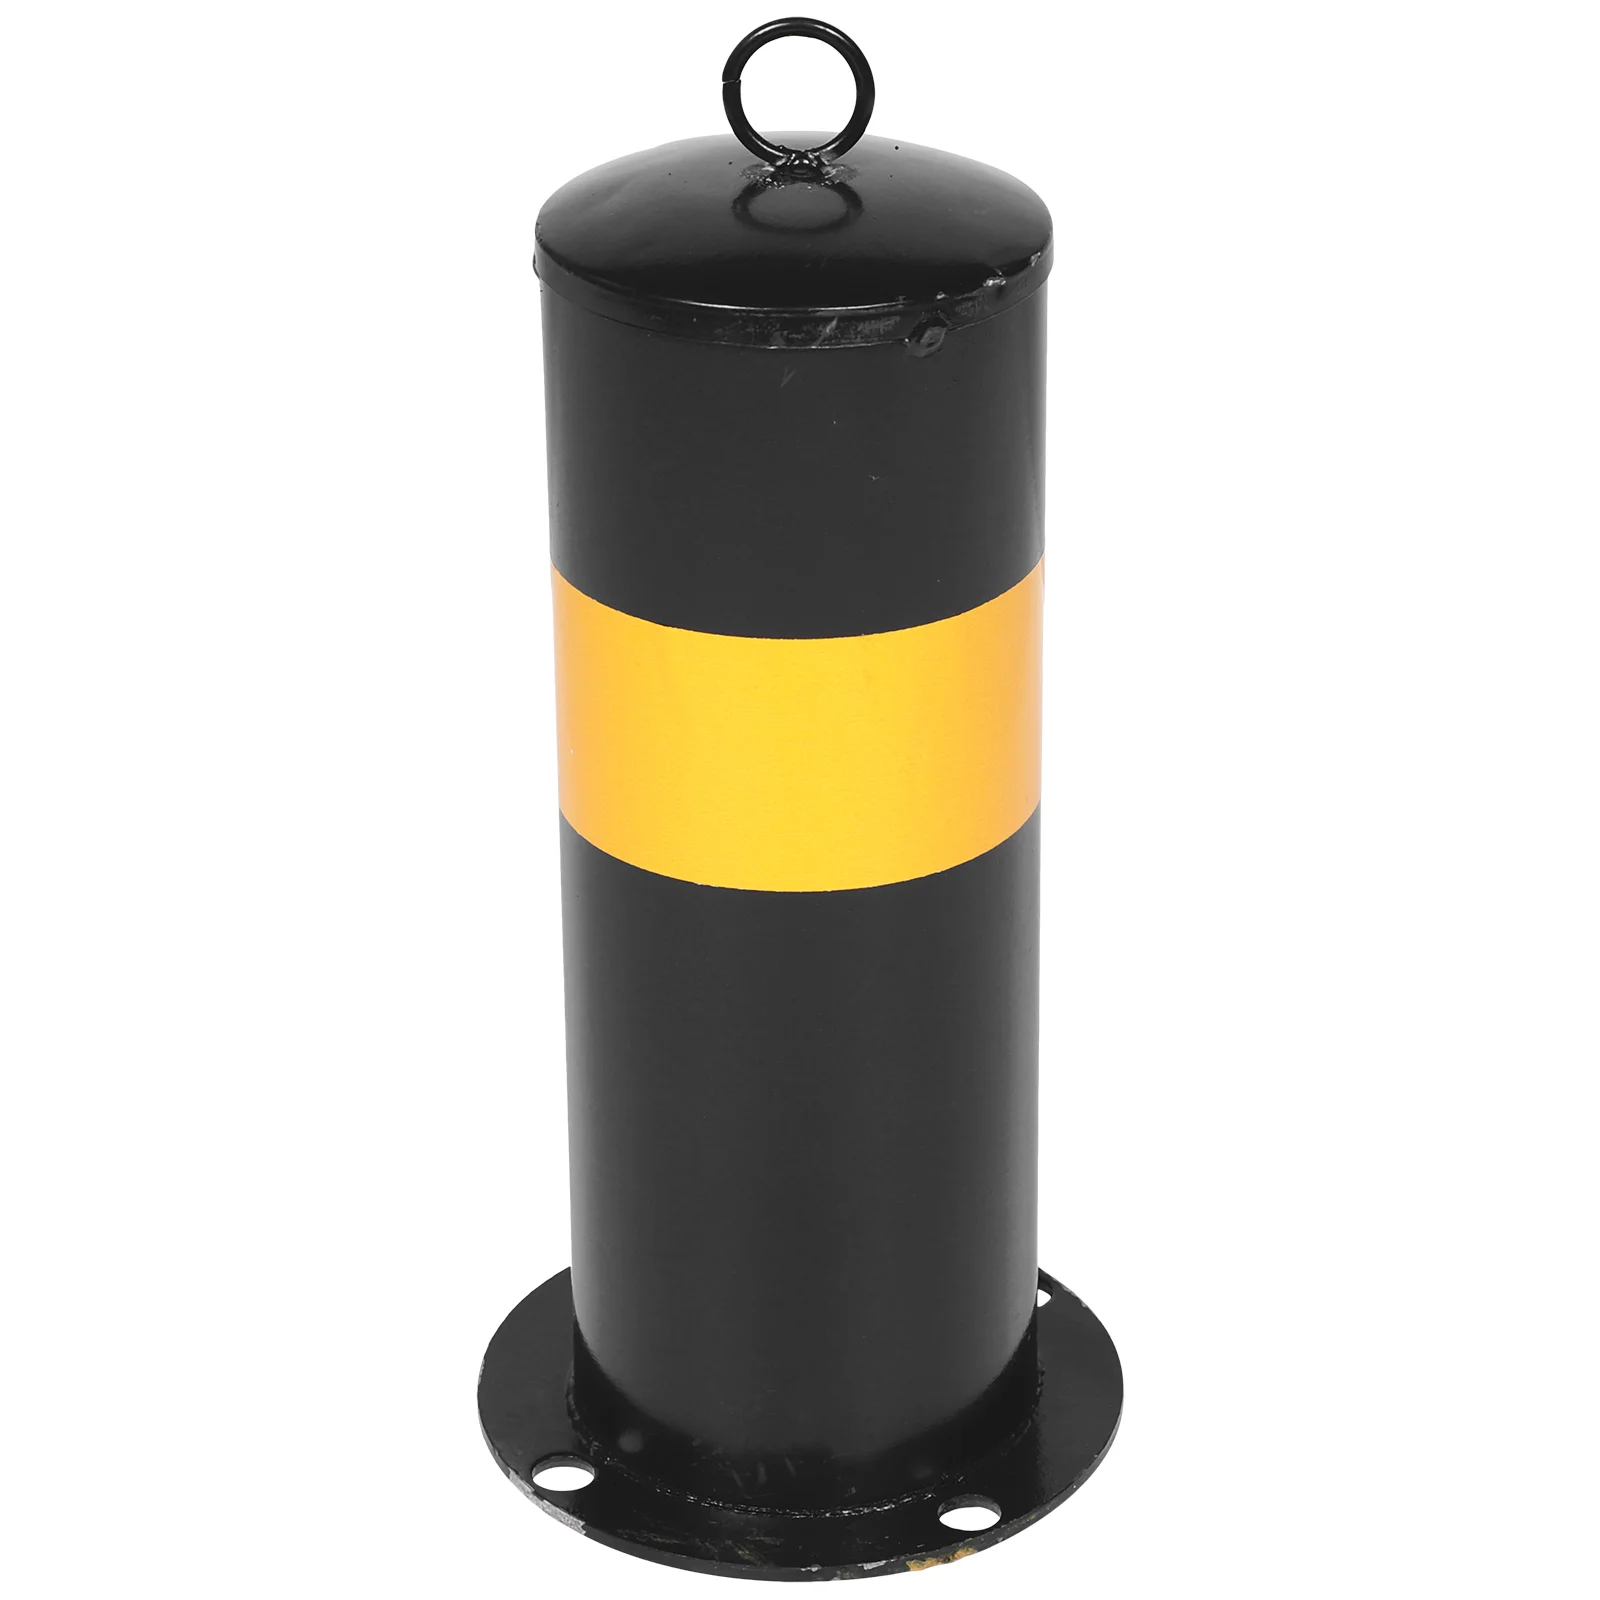 

Warning Column Anti-collision Garage Parking Stops Gadgets Barrier Driveway Security Post Traffic Yellow Protective Railing